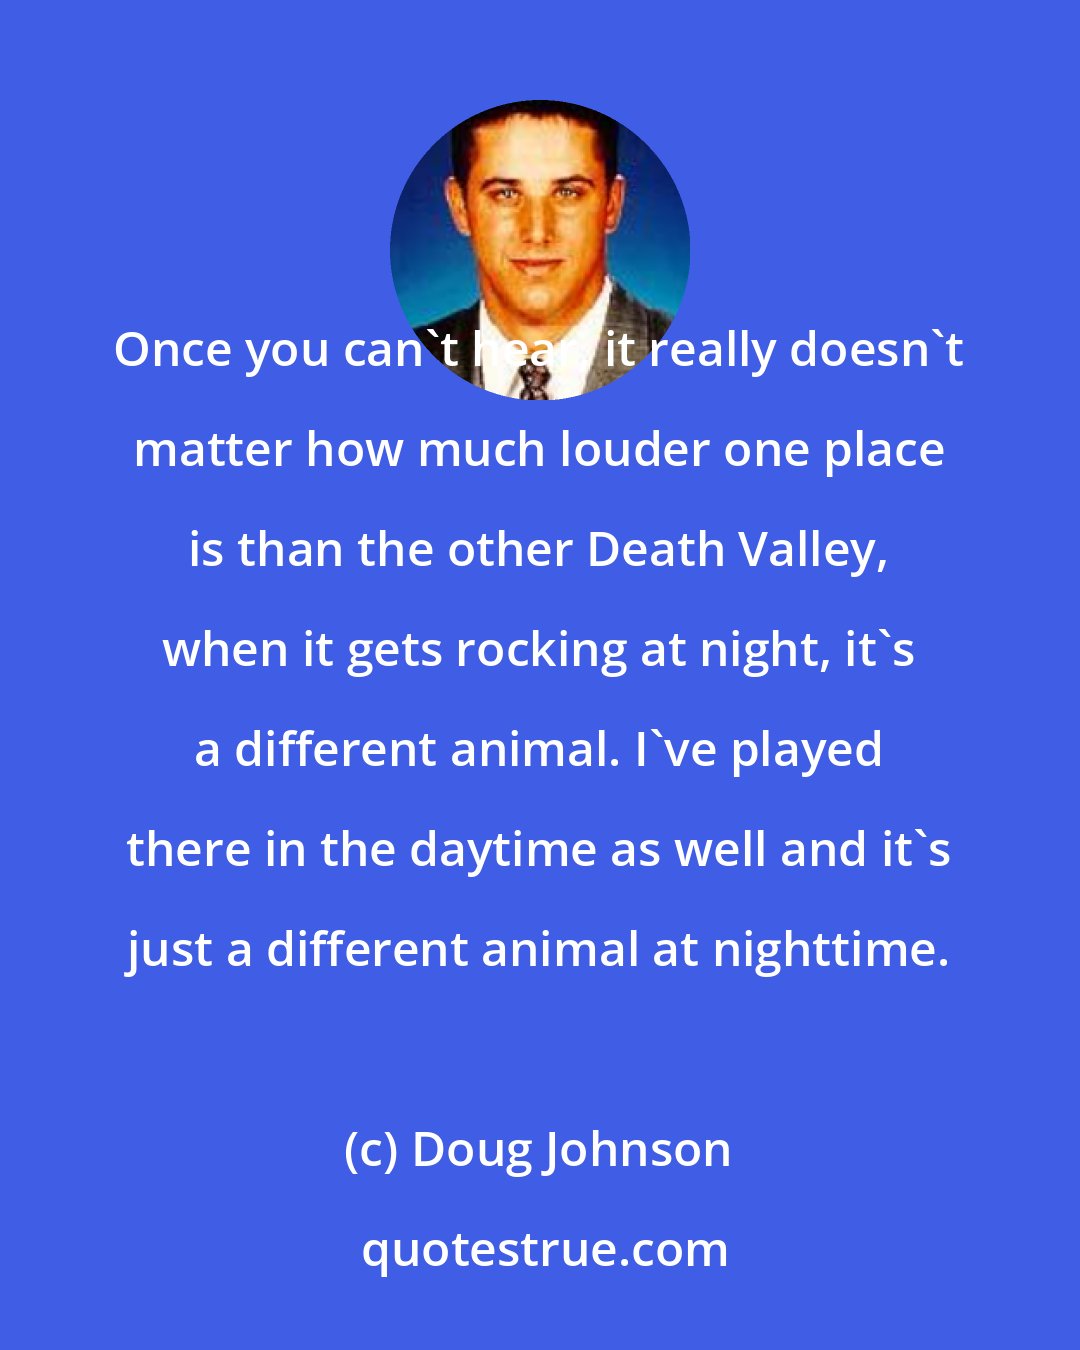 Doug Johnson: Once you can't hear, it really doesn't matter how much louder one place is than the other Death Valley, when it gets rocking at night, it's a different animal. I've played there in the daytime as well and it's just a different animal at nighttime.